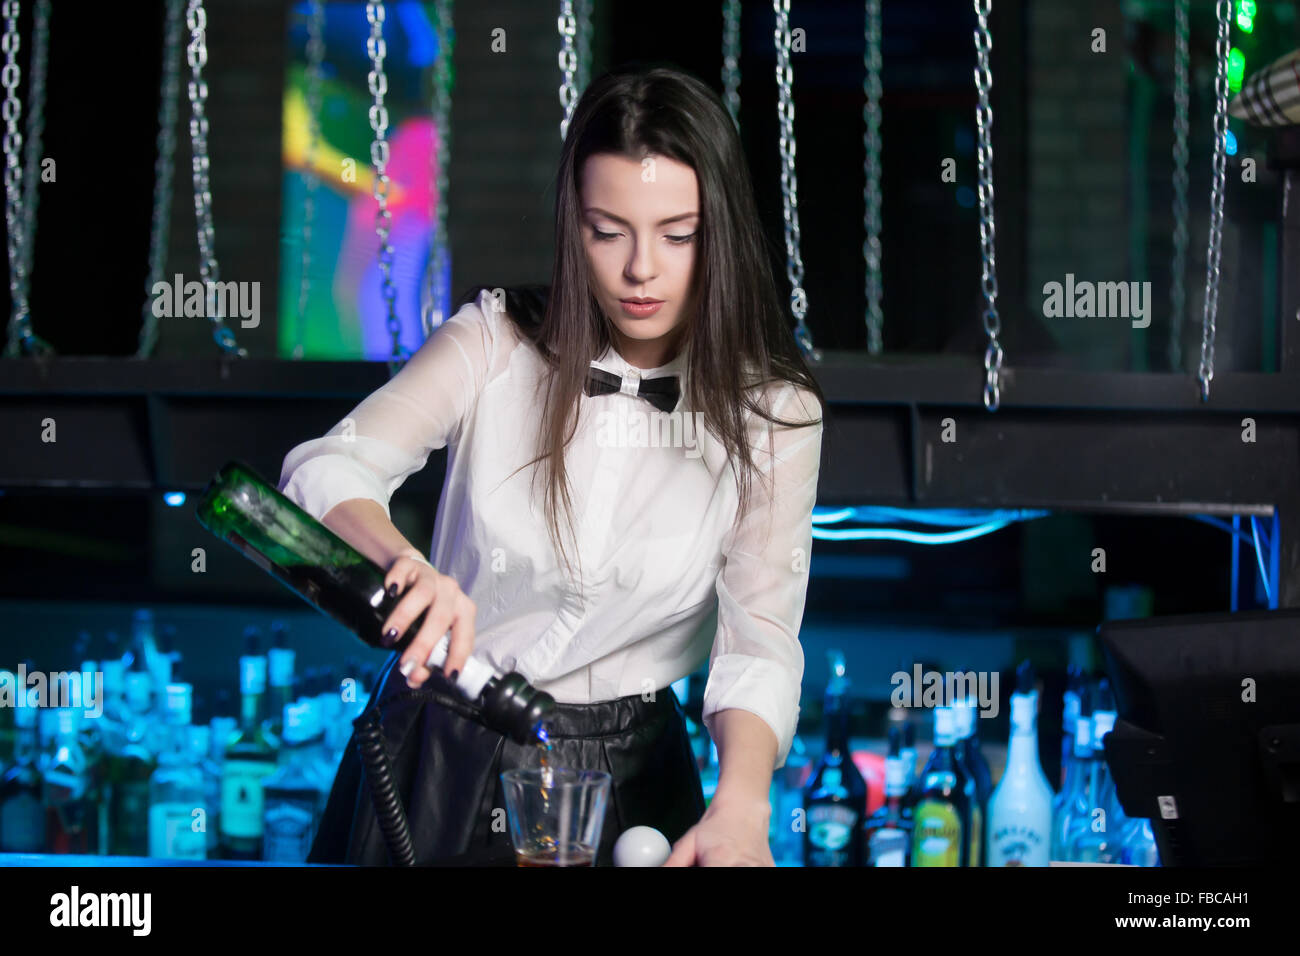 Beautiful brunette bartender girl wearing white shirt and black bow tie, serving alcohol drink at bar counter, holding bottle in Stock Photo